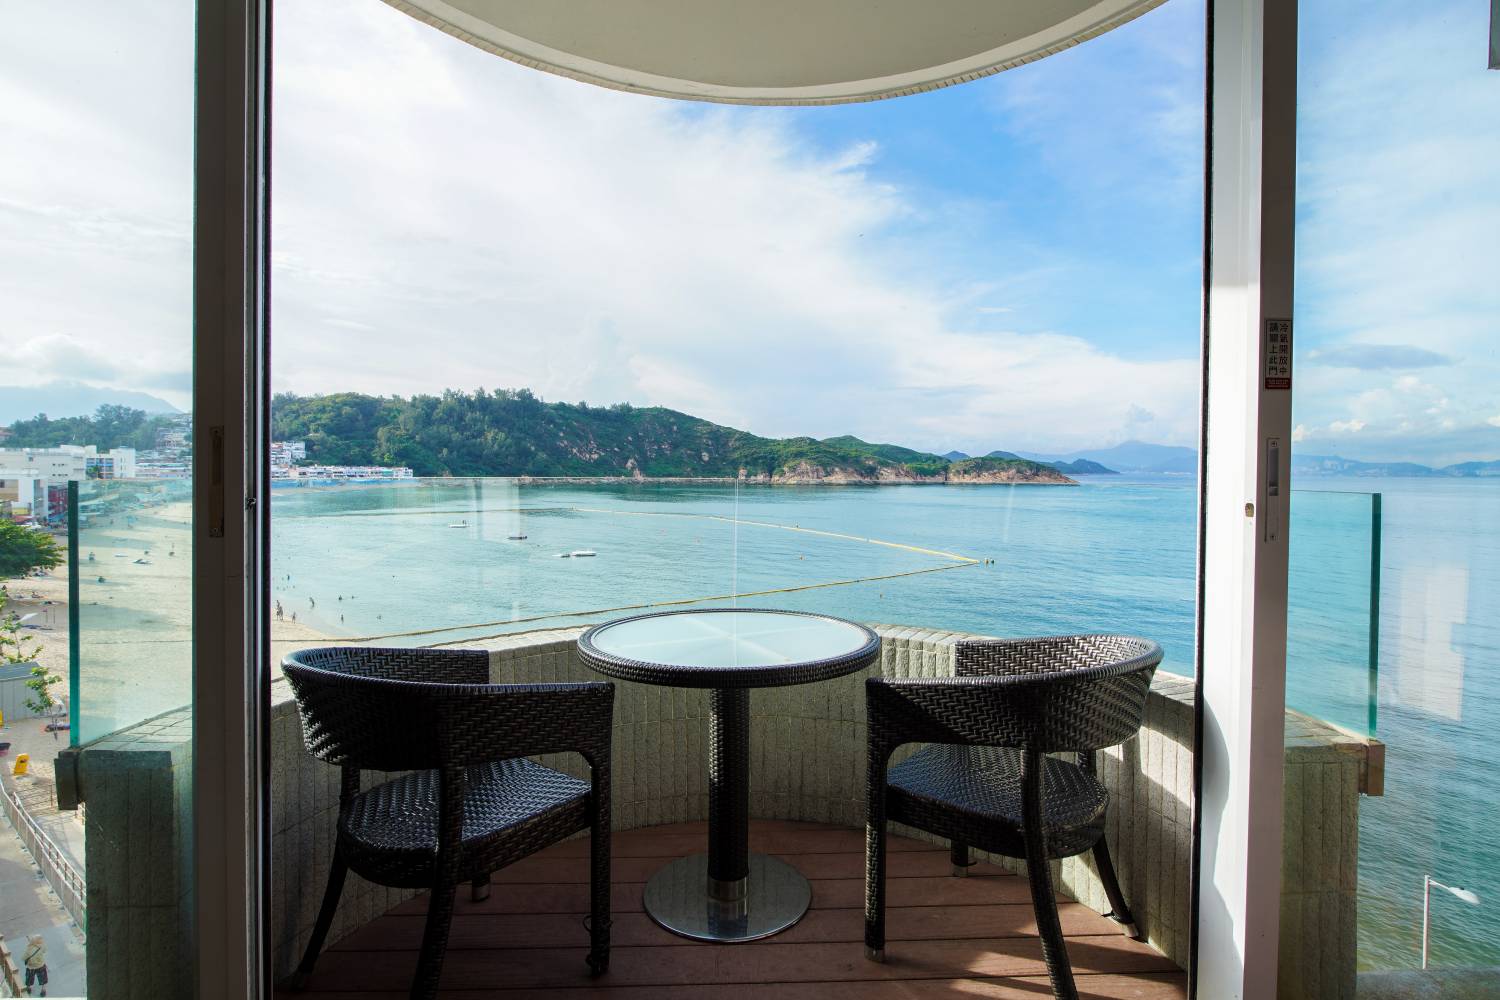 【Island Cultural Package】Ocean View Room + Seaview Balcony + Breakfast + Cultural Experience｜The Warwick Hotel